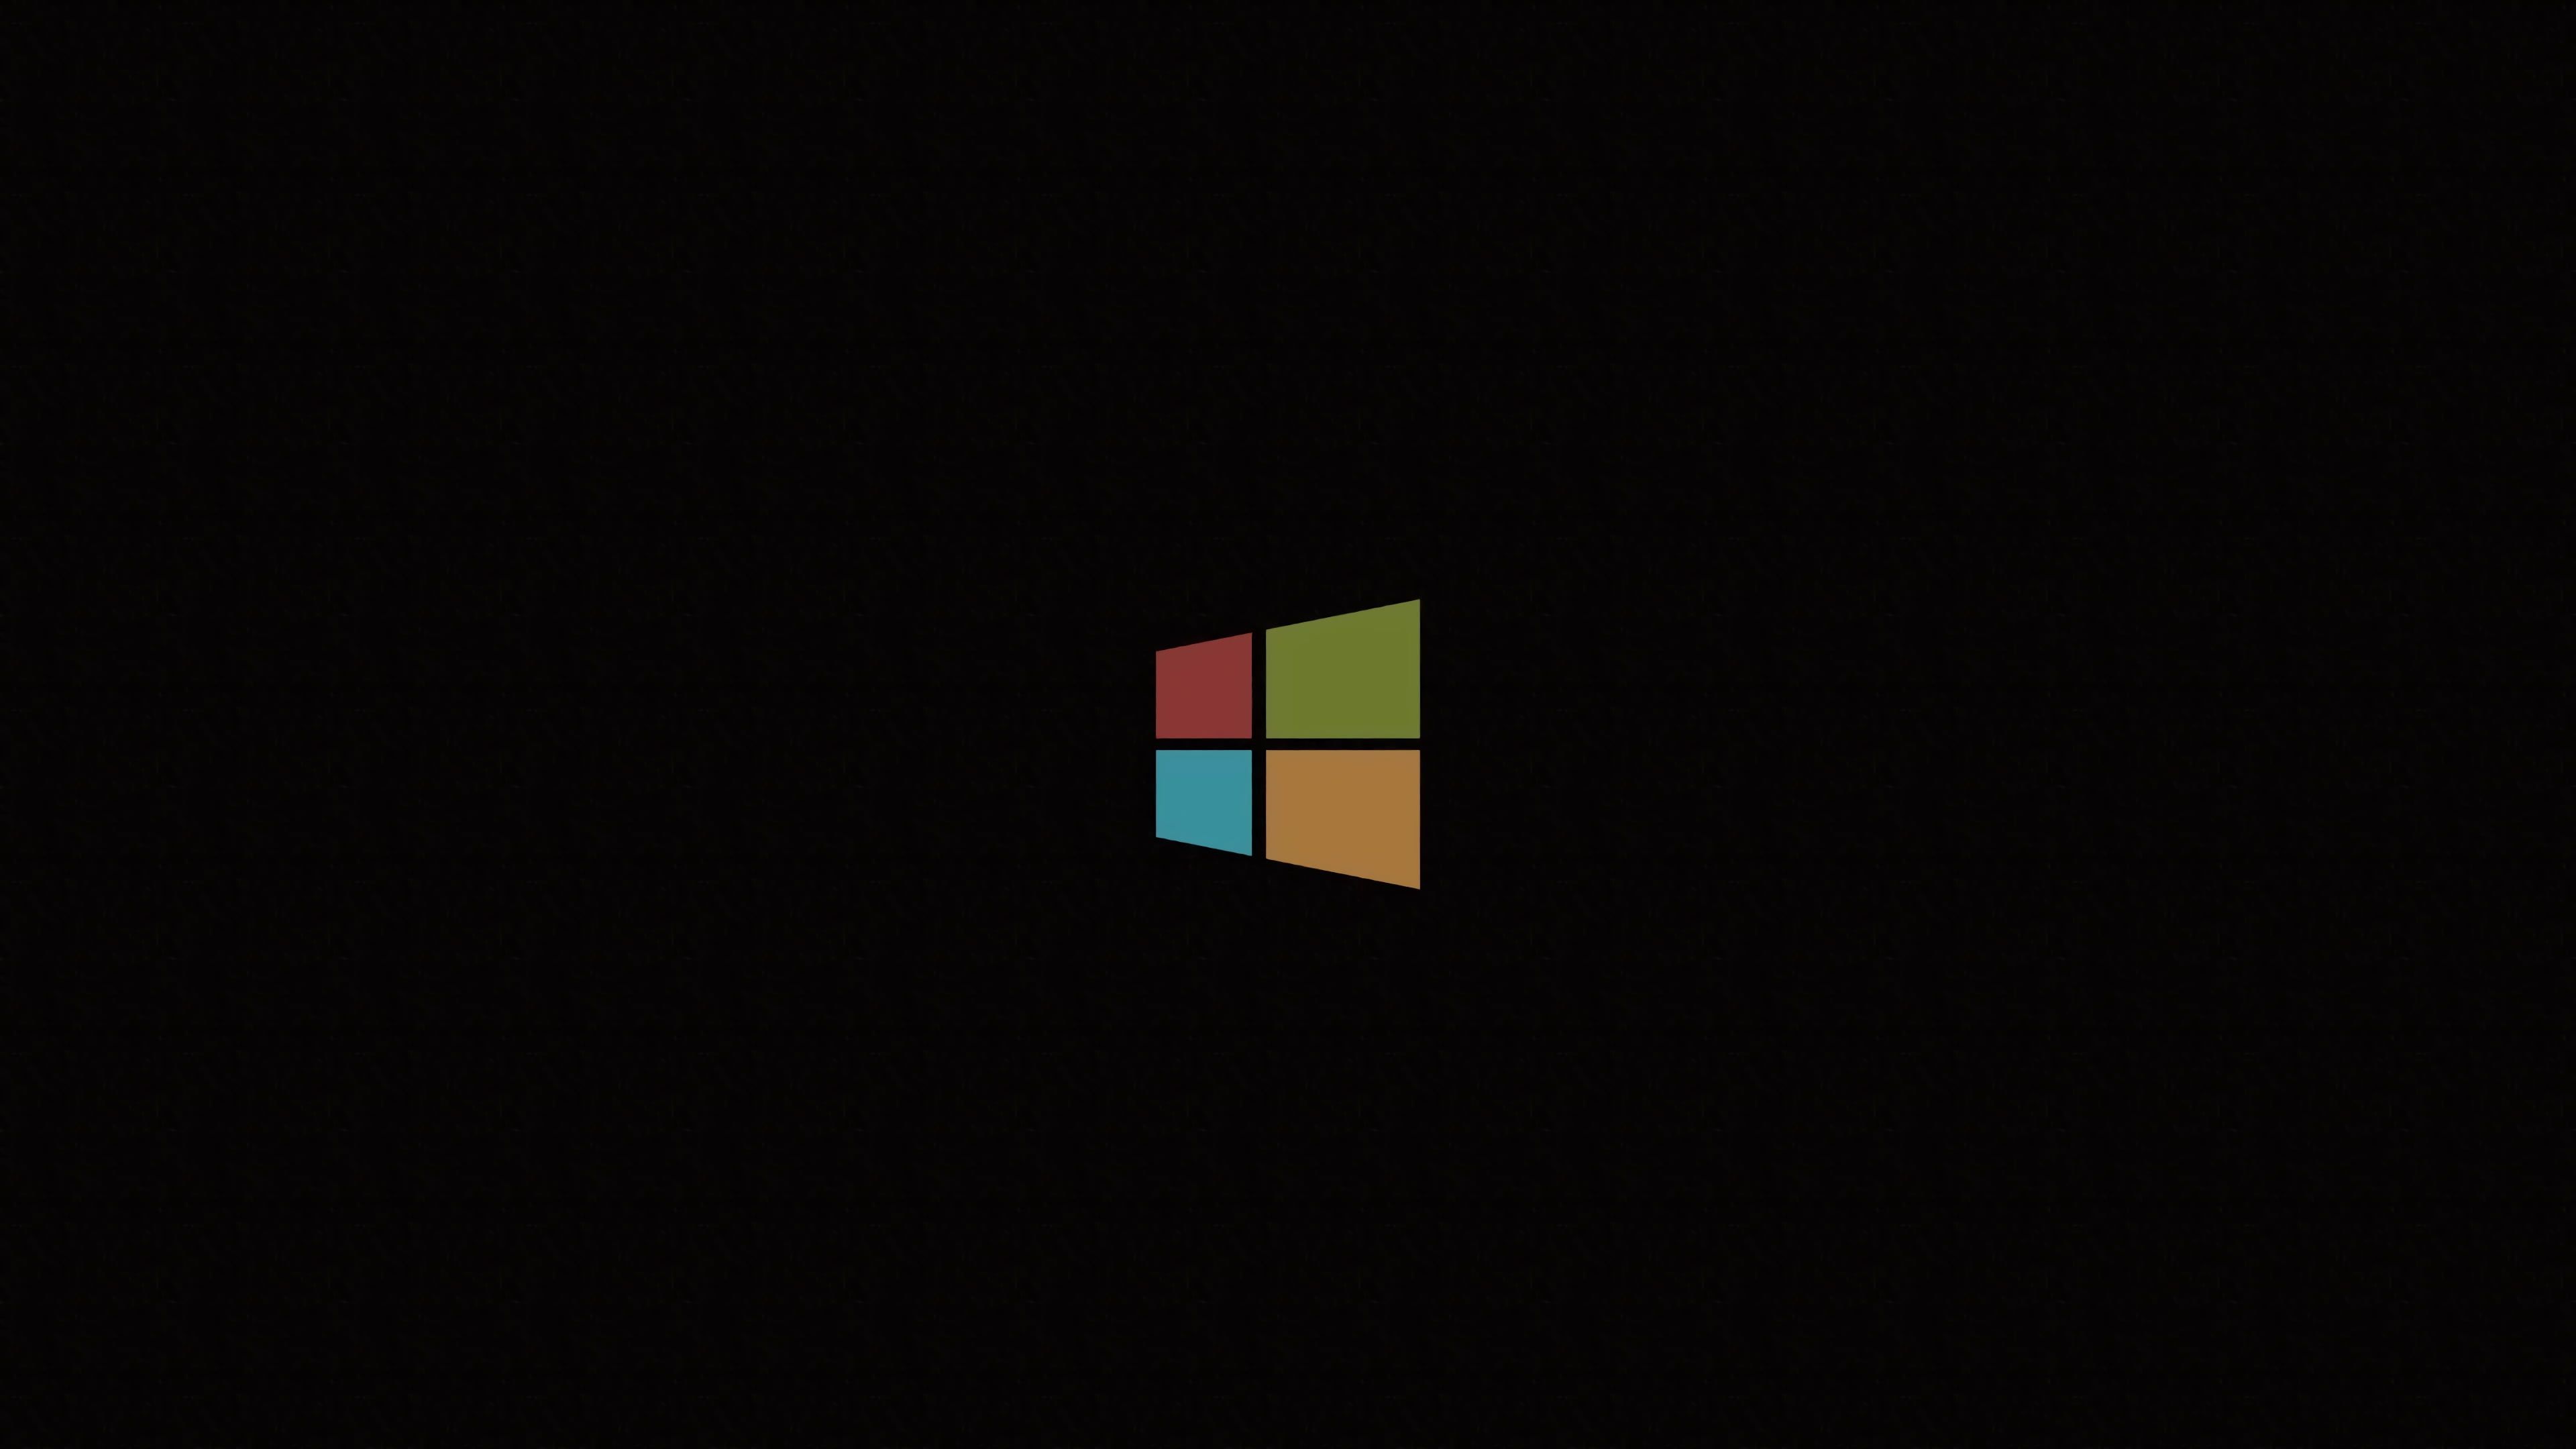 Microsoft: Minimalism, Released Windows 2.0 in 1987, Acquired Ensemble Studios in May 2001. 3840x2160 4K Background.